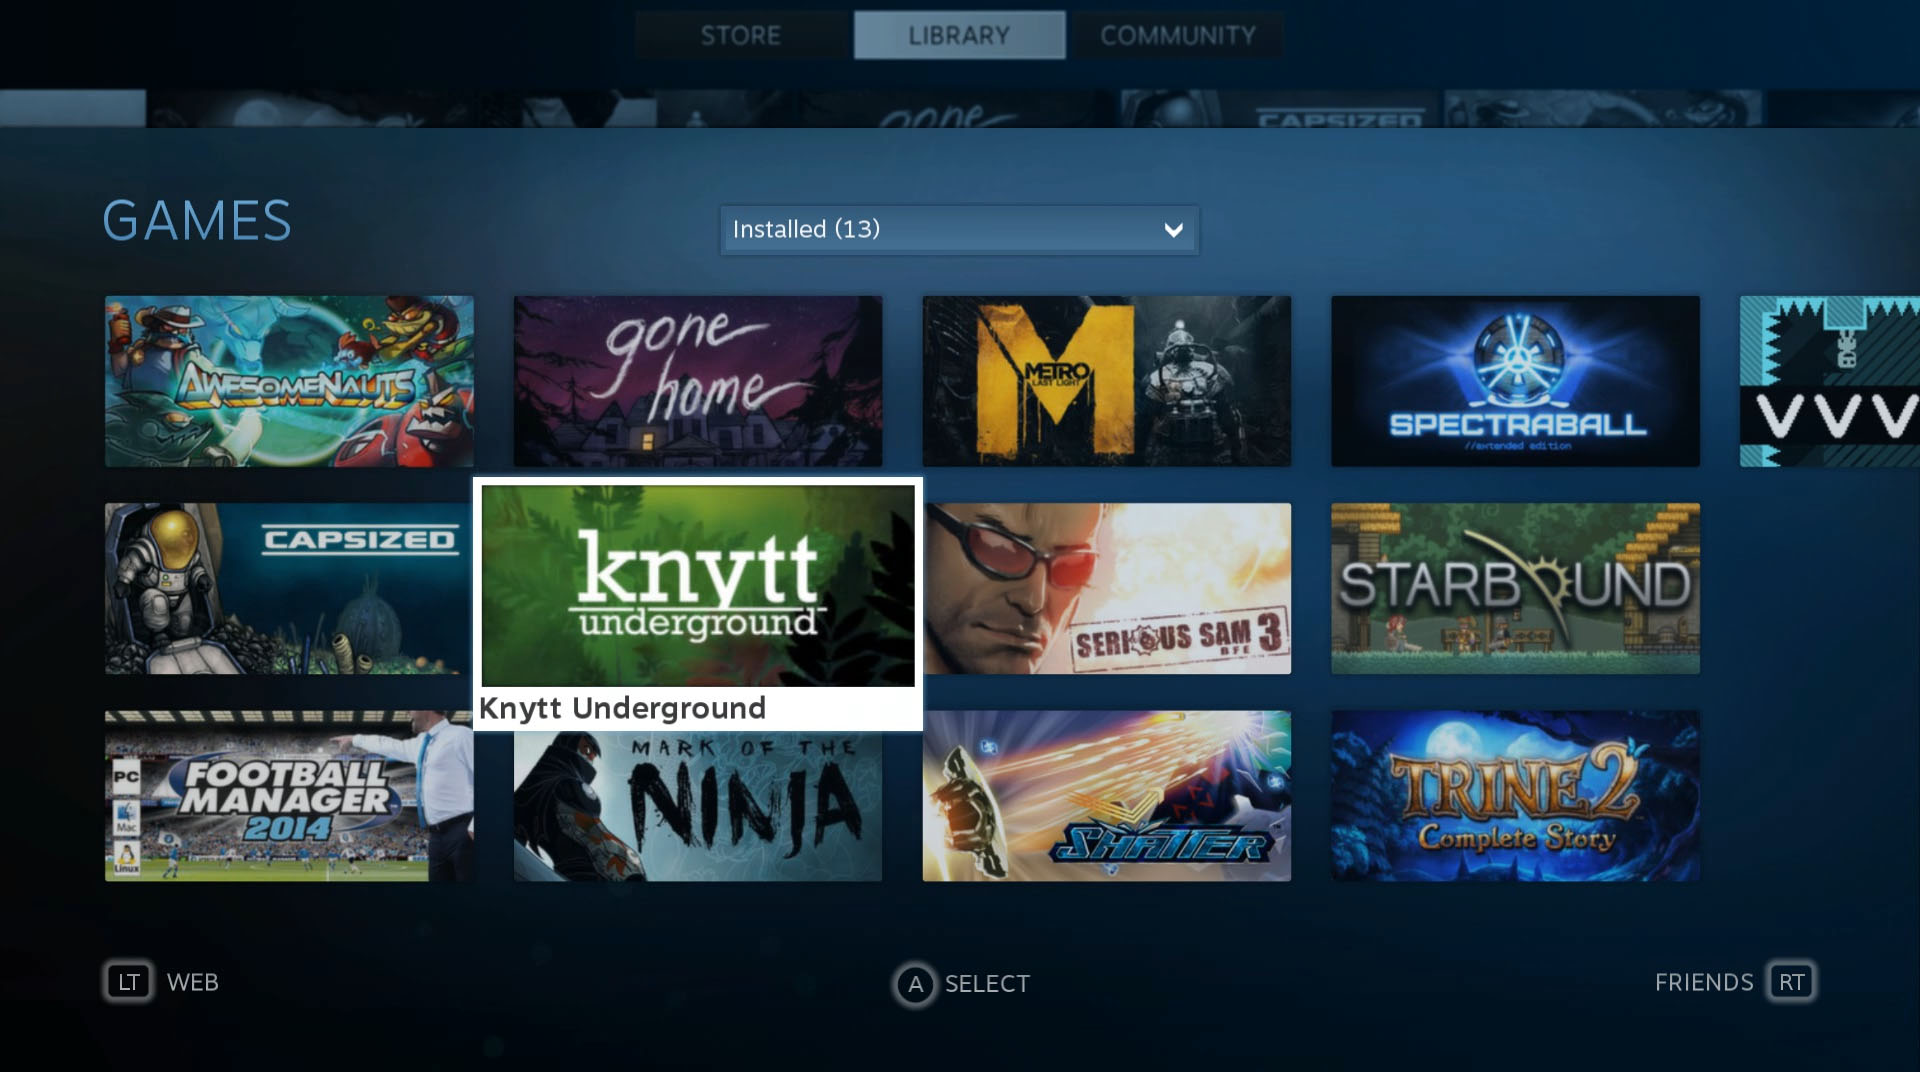 http://techgage.com/wp-content/uploads/2013/12/SteamOS-Library.jpg